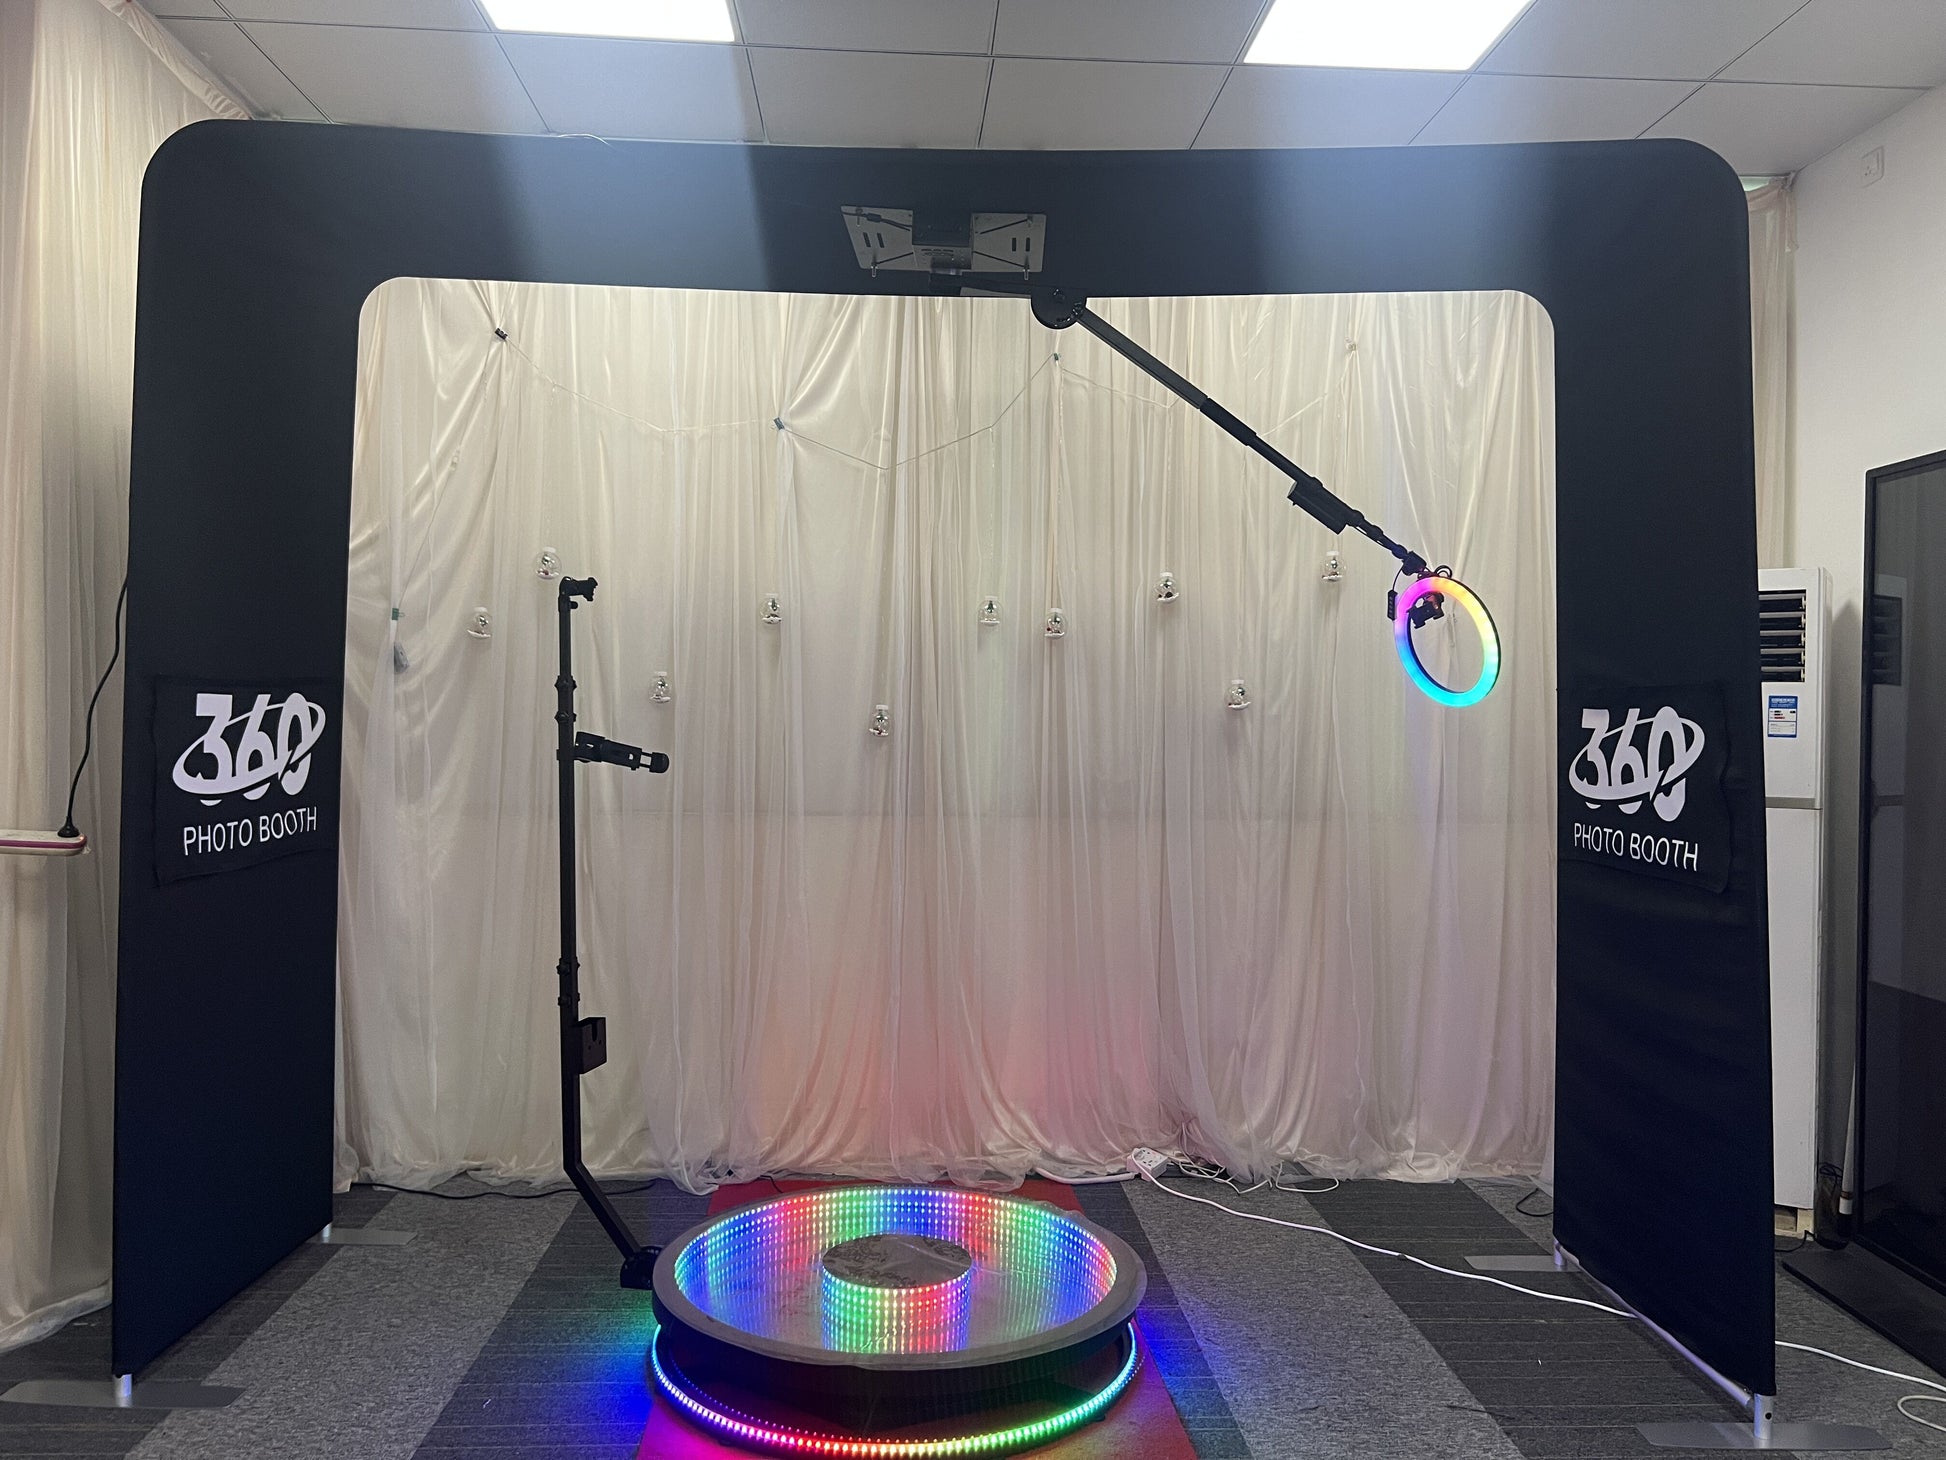 What is a 360 Photo Booth, and How Does It Work